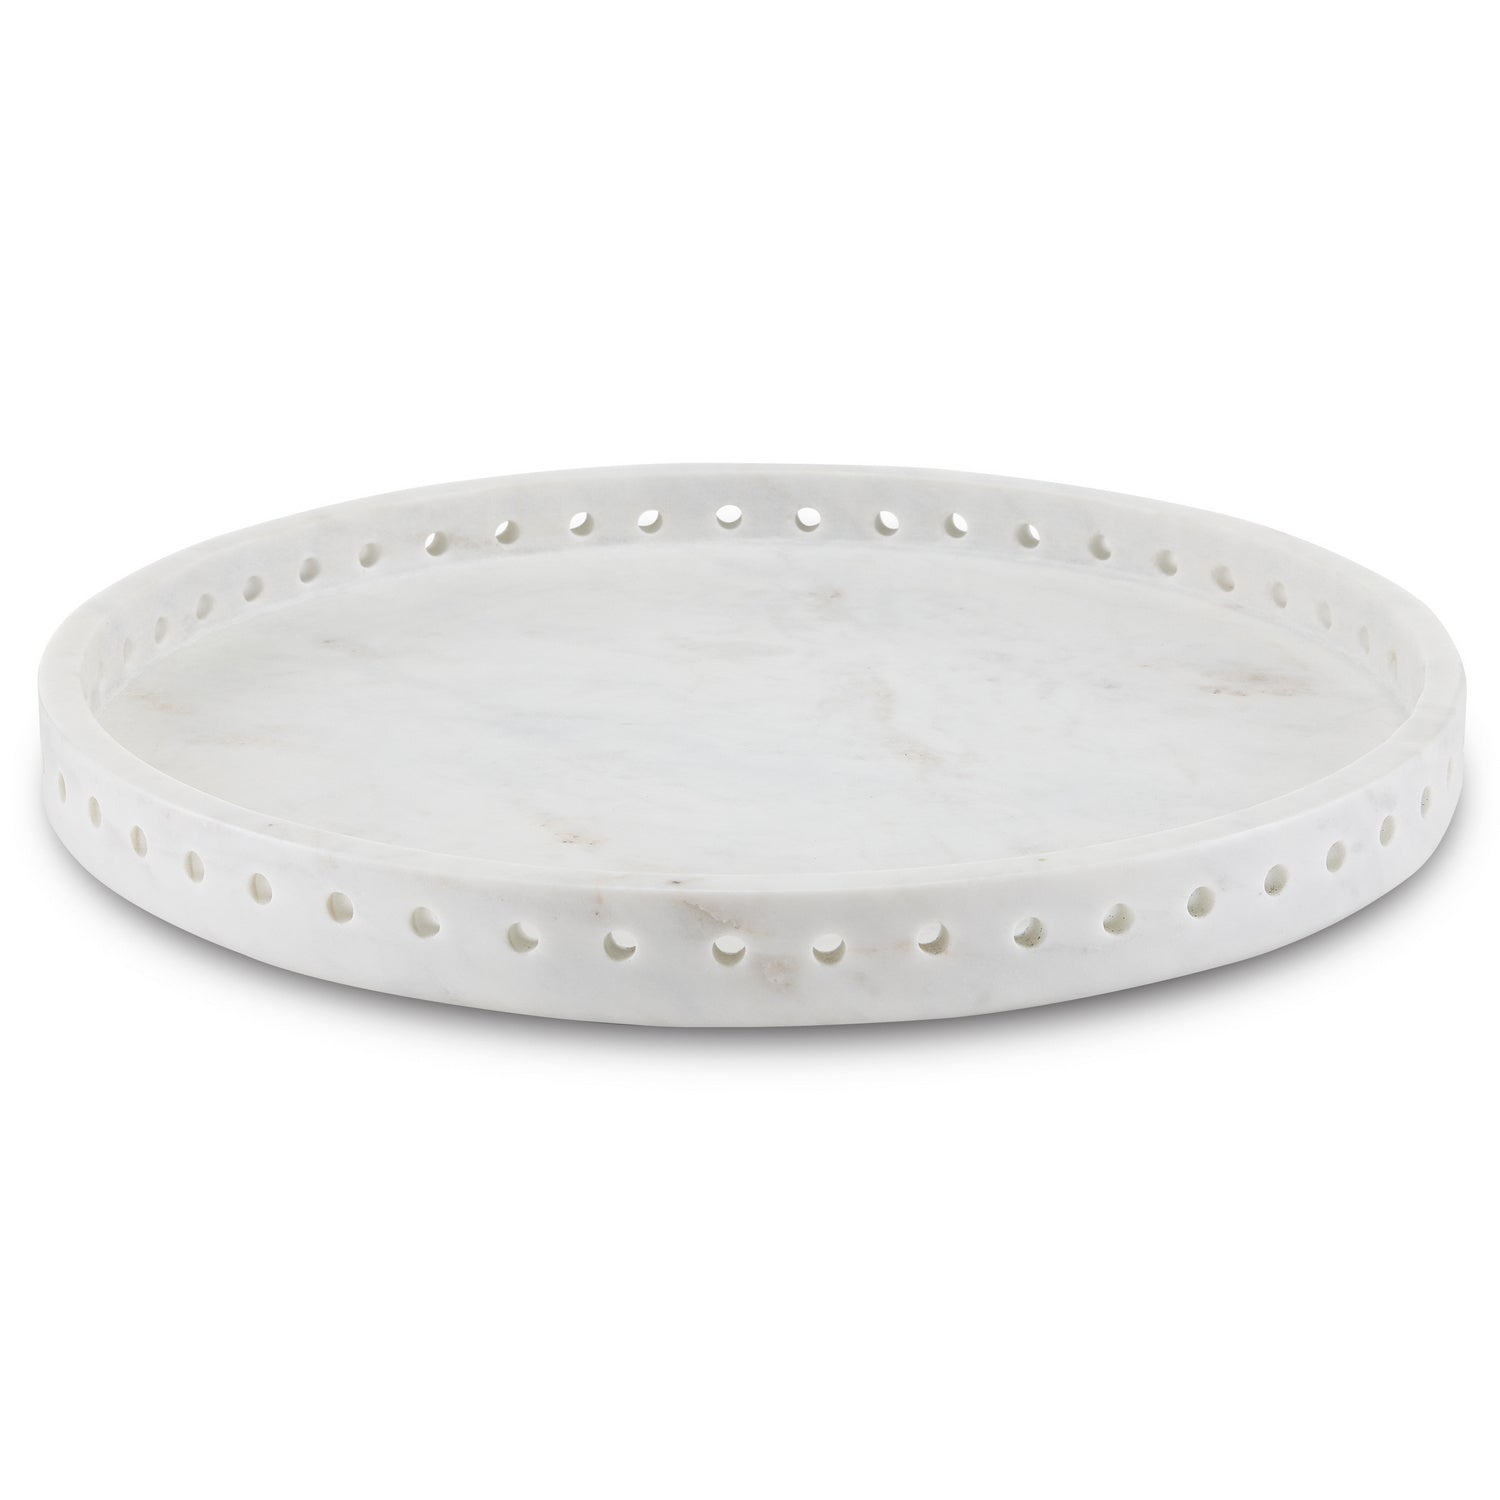 Tray from the Freya collection in White finish